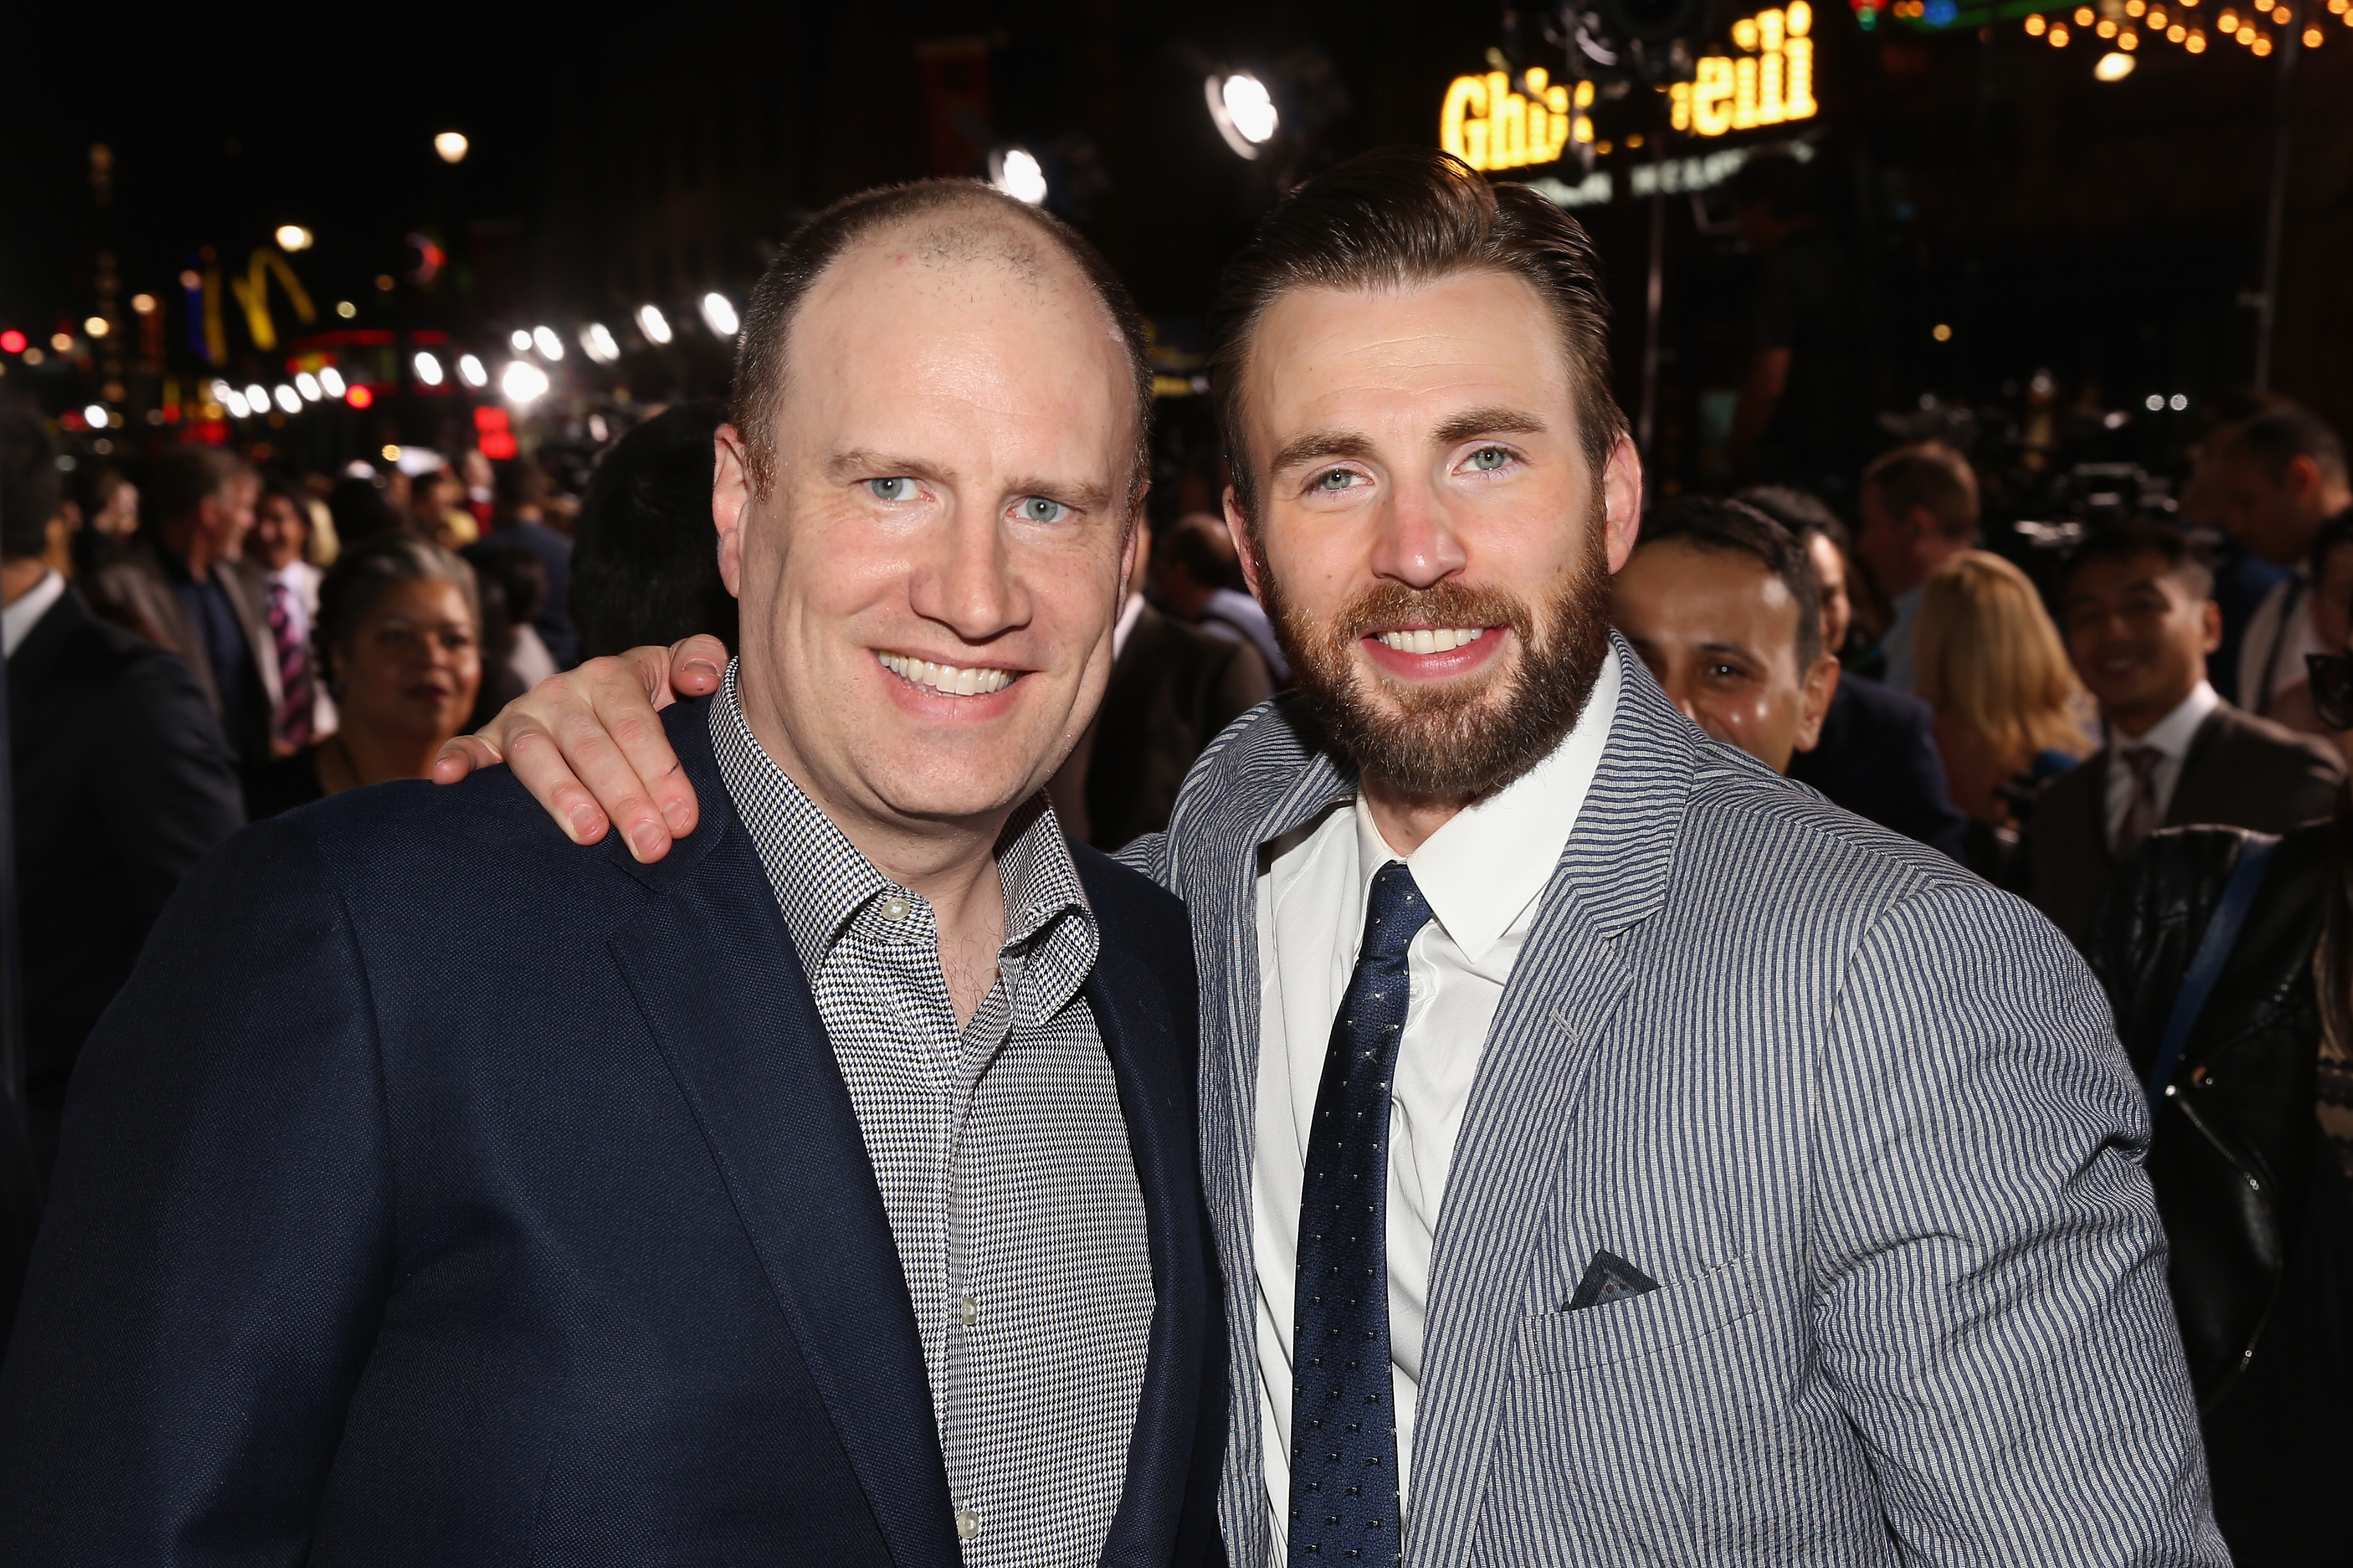 Kevin Feige Confirms Chris Evans Will Not Reprise Role Of Captain America